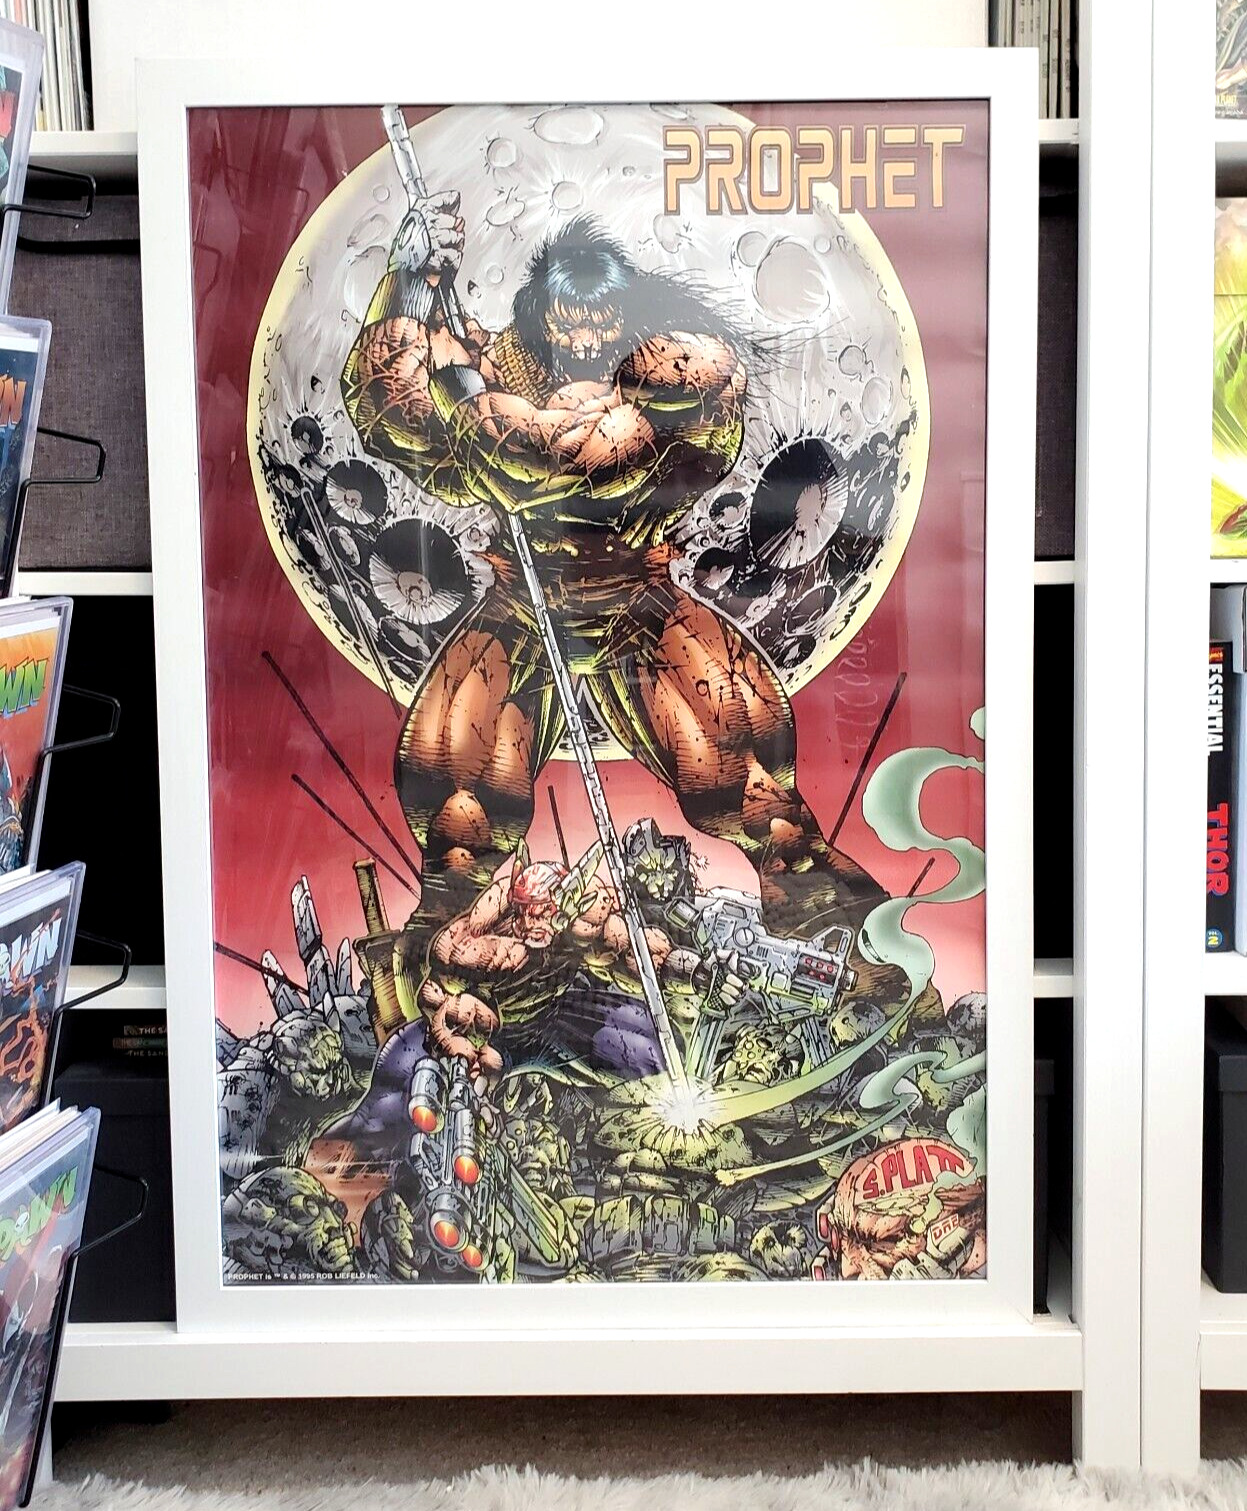 Prophet Poster 24x36 Image Comics 1995 Art by Rob Liefeld HTF (rare)